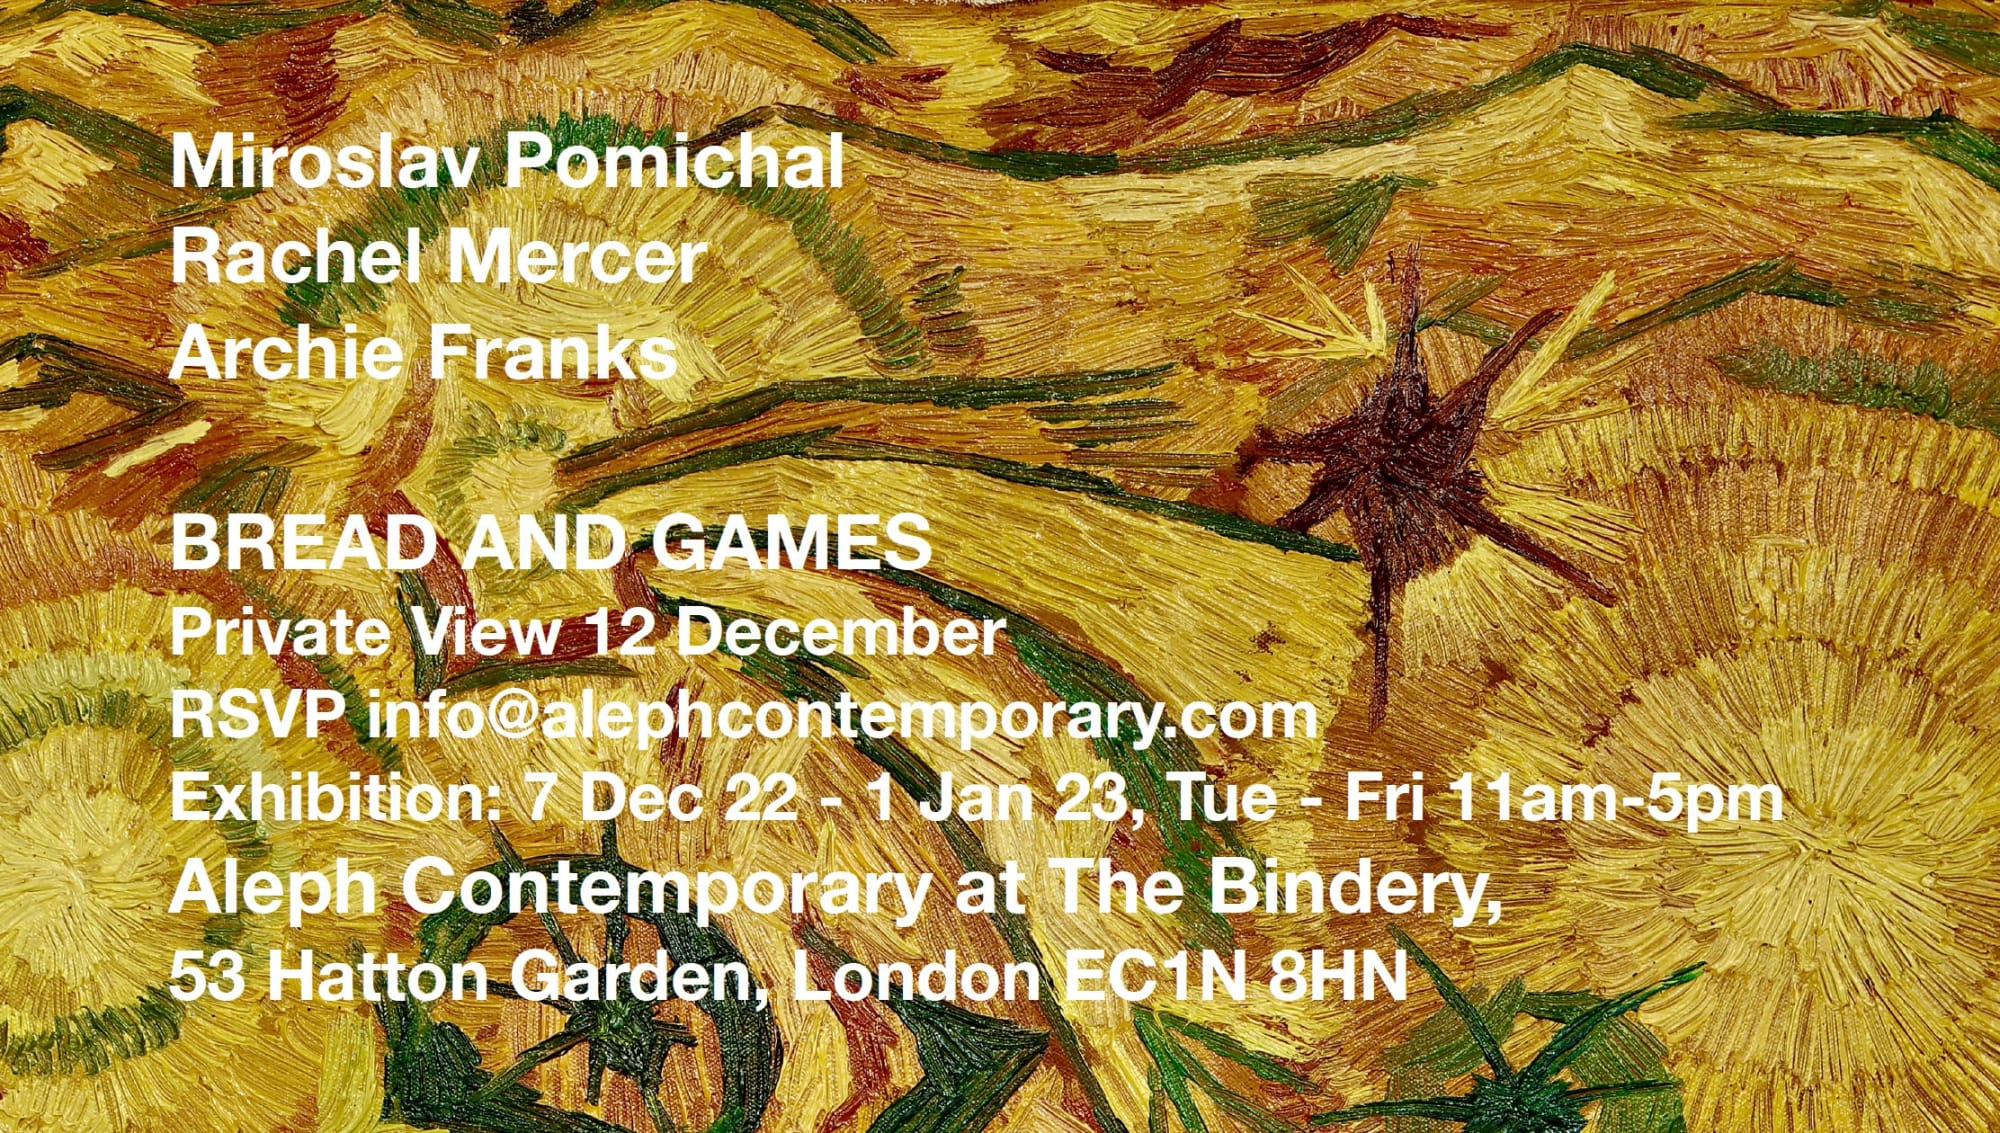 Miroslav Pomichal, Rachel Mercer, Archie Franks: Bread and Games. Text by Paul Carey-Kent: Now online and virtual